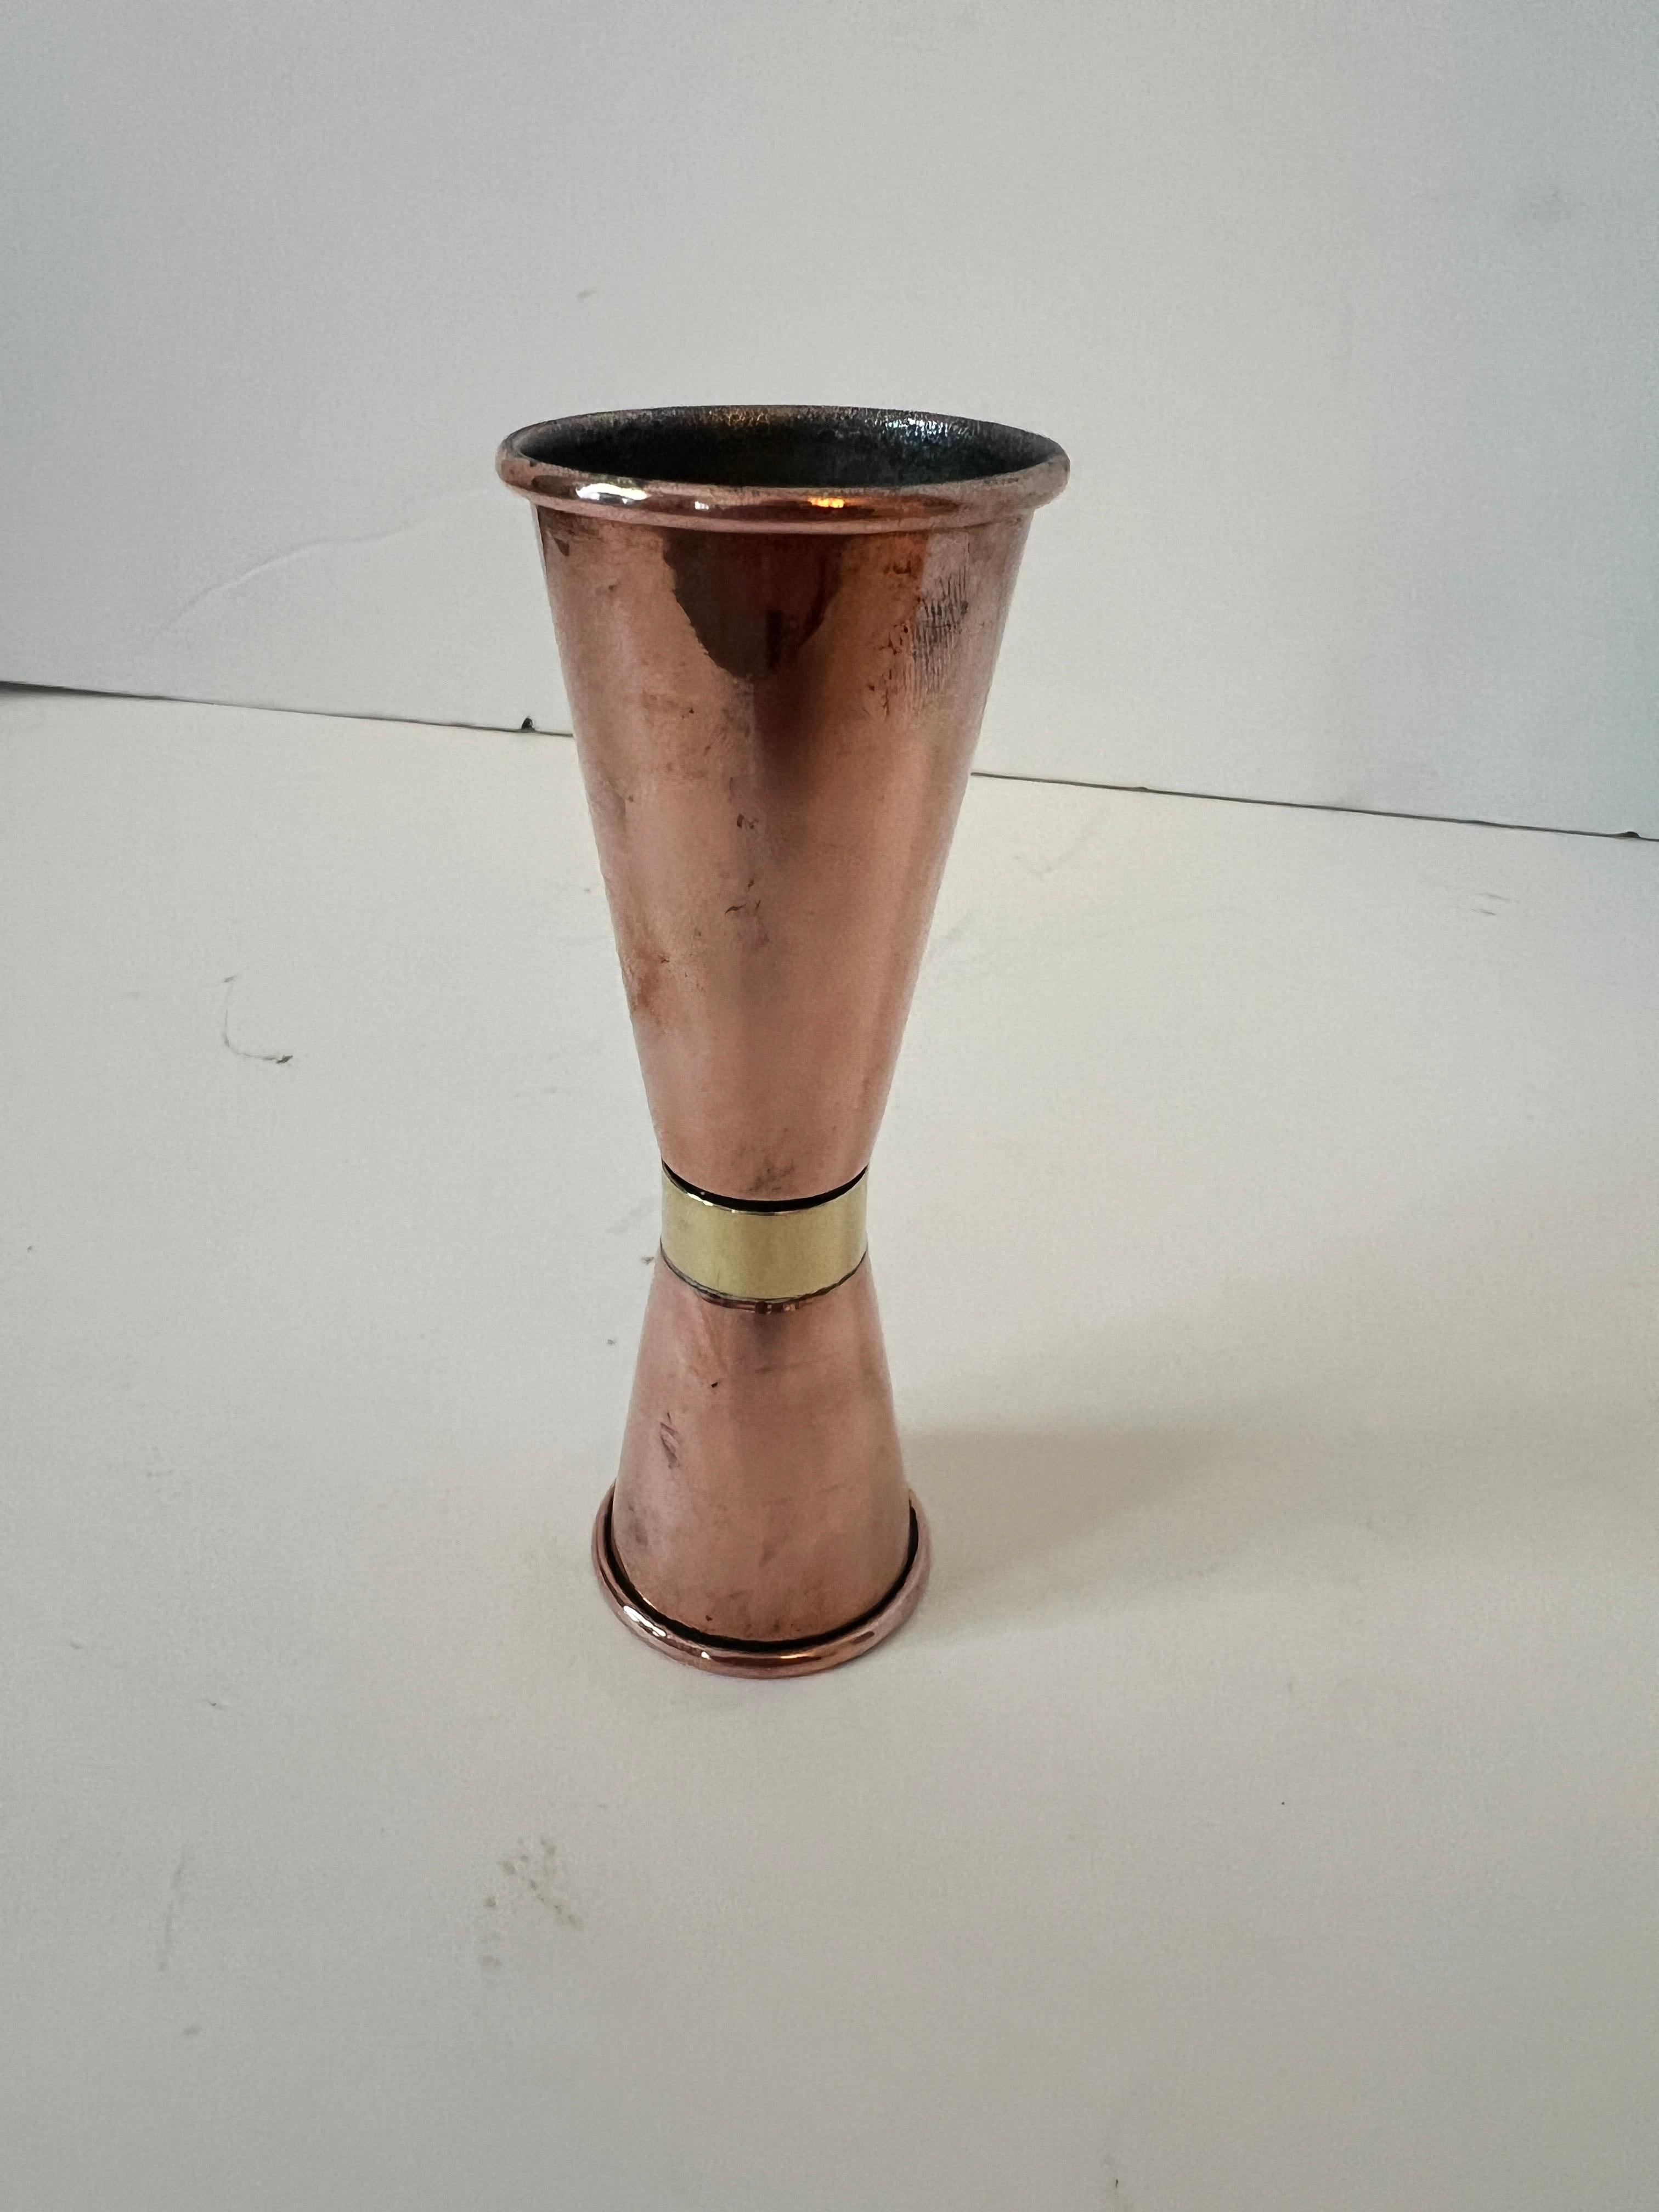 A simple, yet elegant copper and brass jigger - a compliment to any bar and conveniently can be used for one of two 'fingers' of spirits.  1 ounce - 1.5 ounce sizes

We think this classic style and beautiful metals give the jigger a look that is